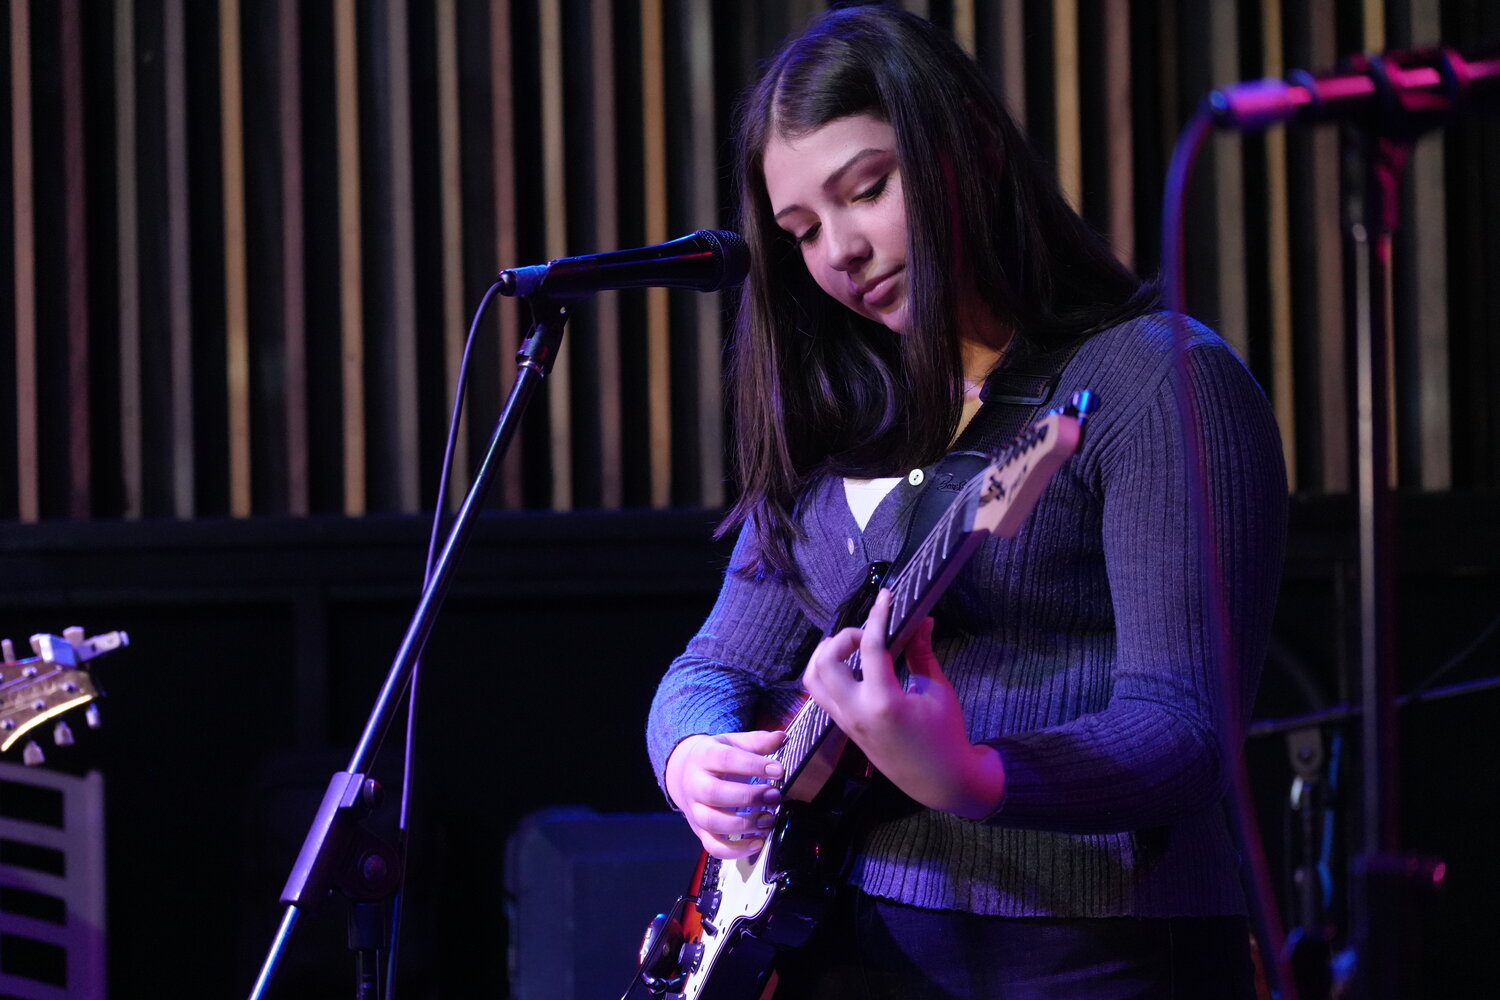 Angelica Abreu, 15, of East Meadow, played and sang ‘Fly Love,’ from the movie ‘Rio,’ at the jam.